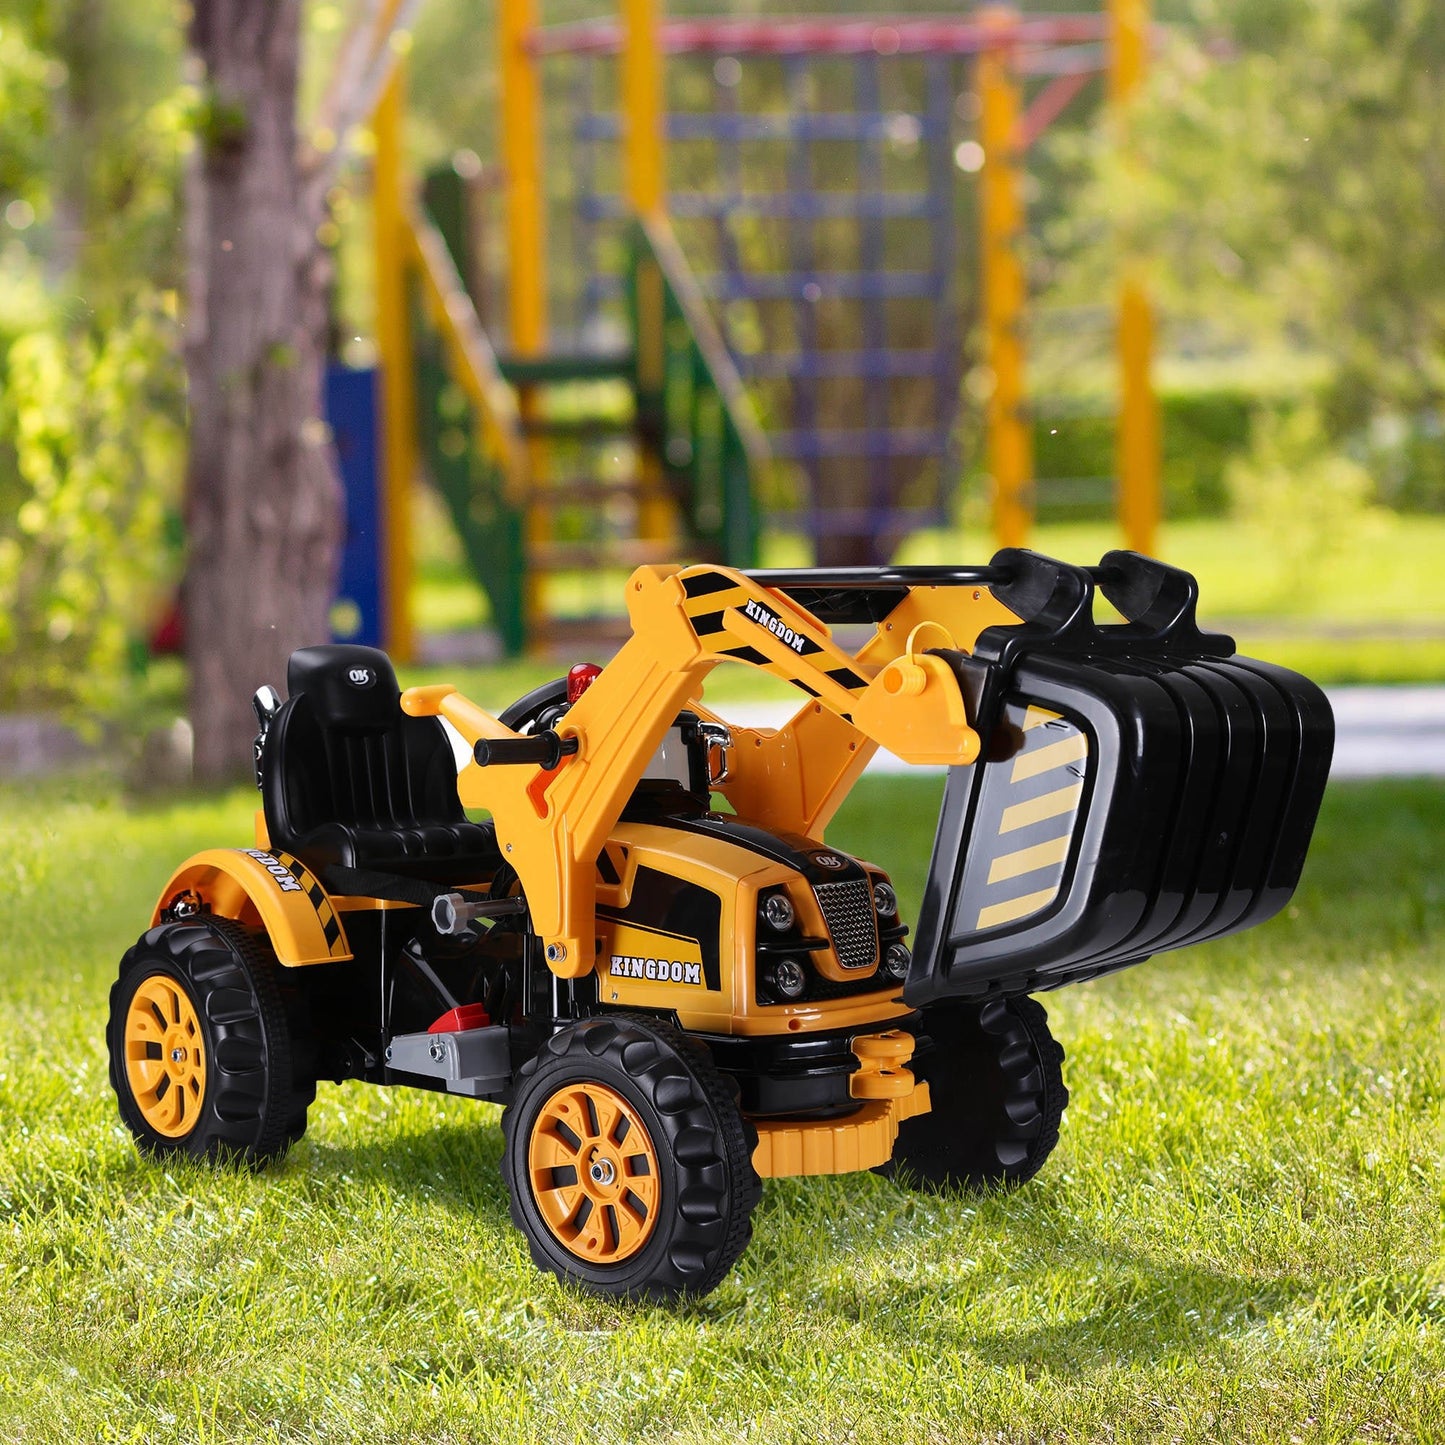 Toys and Games-6V Toy Tractor Electric Kids Ride On Toy Digger Construction Excavator Tractor Vehicle Digger Toy Moving Forward Backward, Yellow/Black - Outdoor Style Company